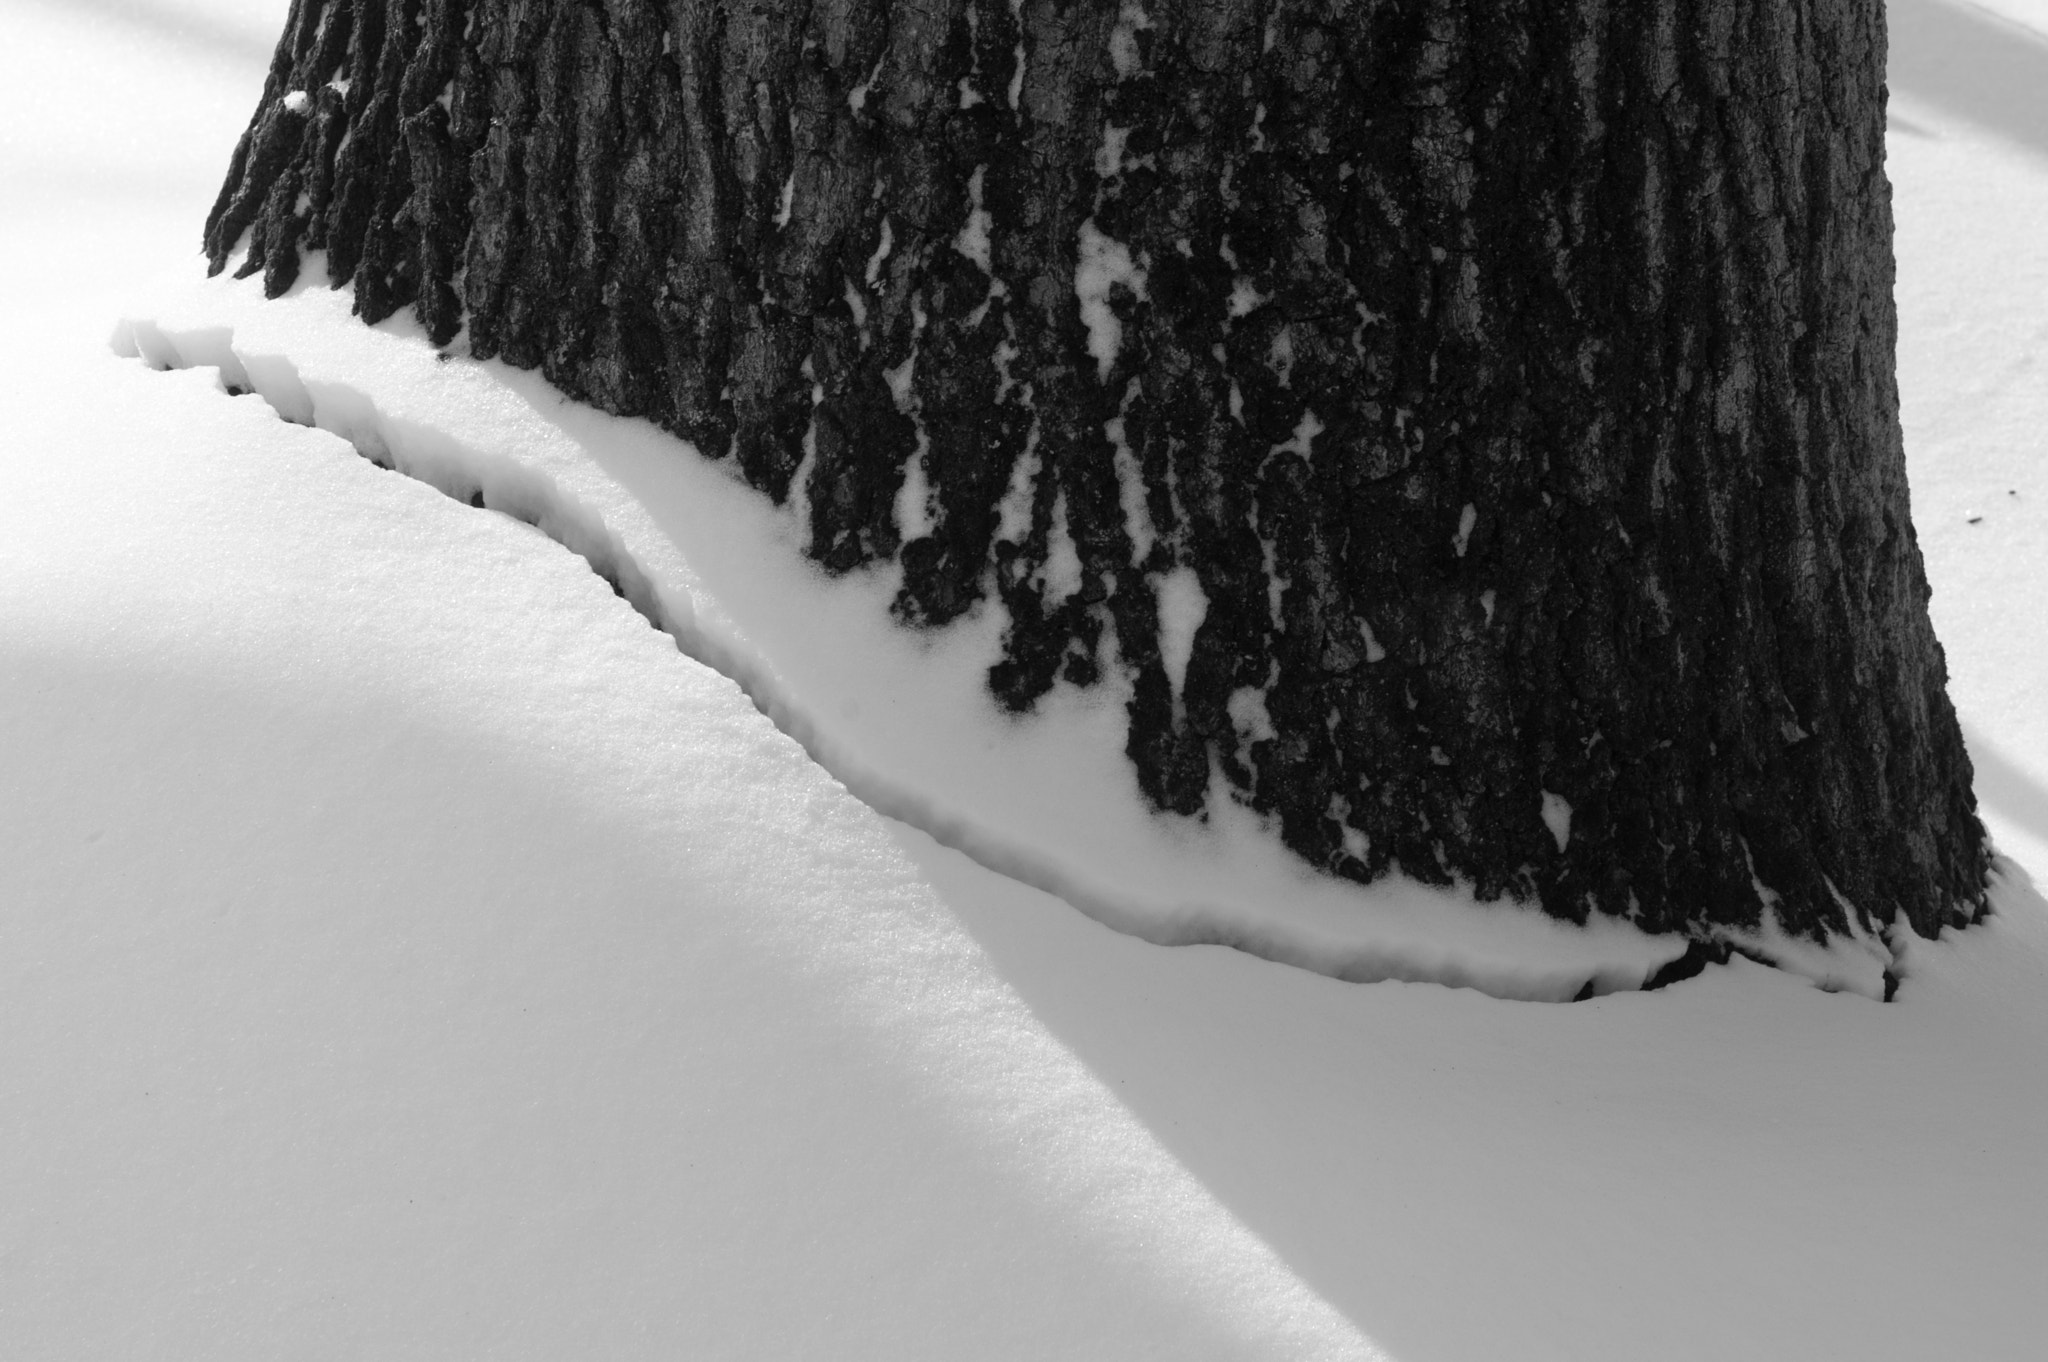 Pentax K-3 sample photo. Tree trunk and cracked snow photography